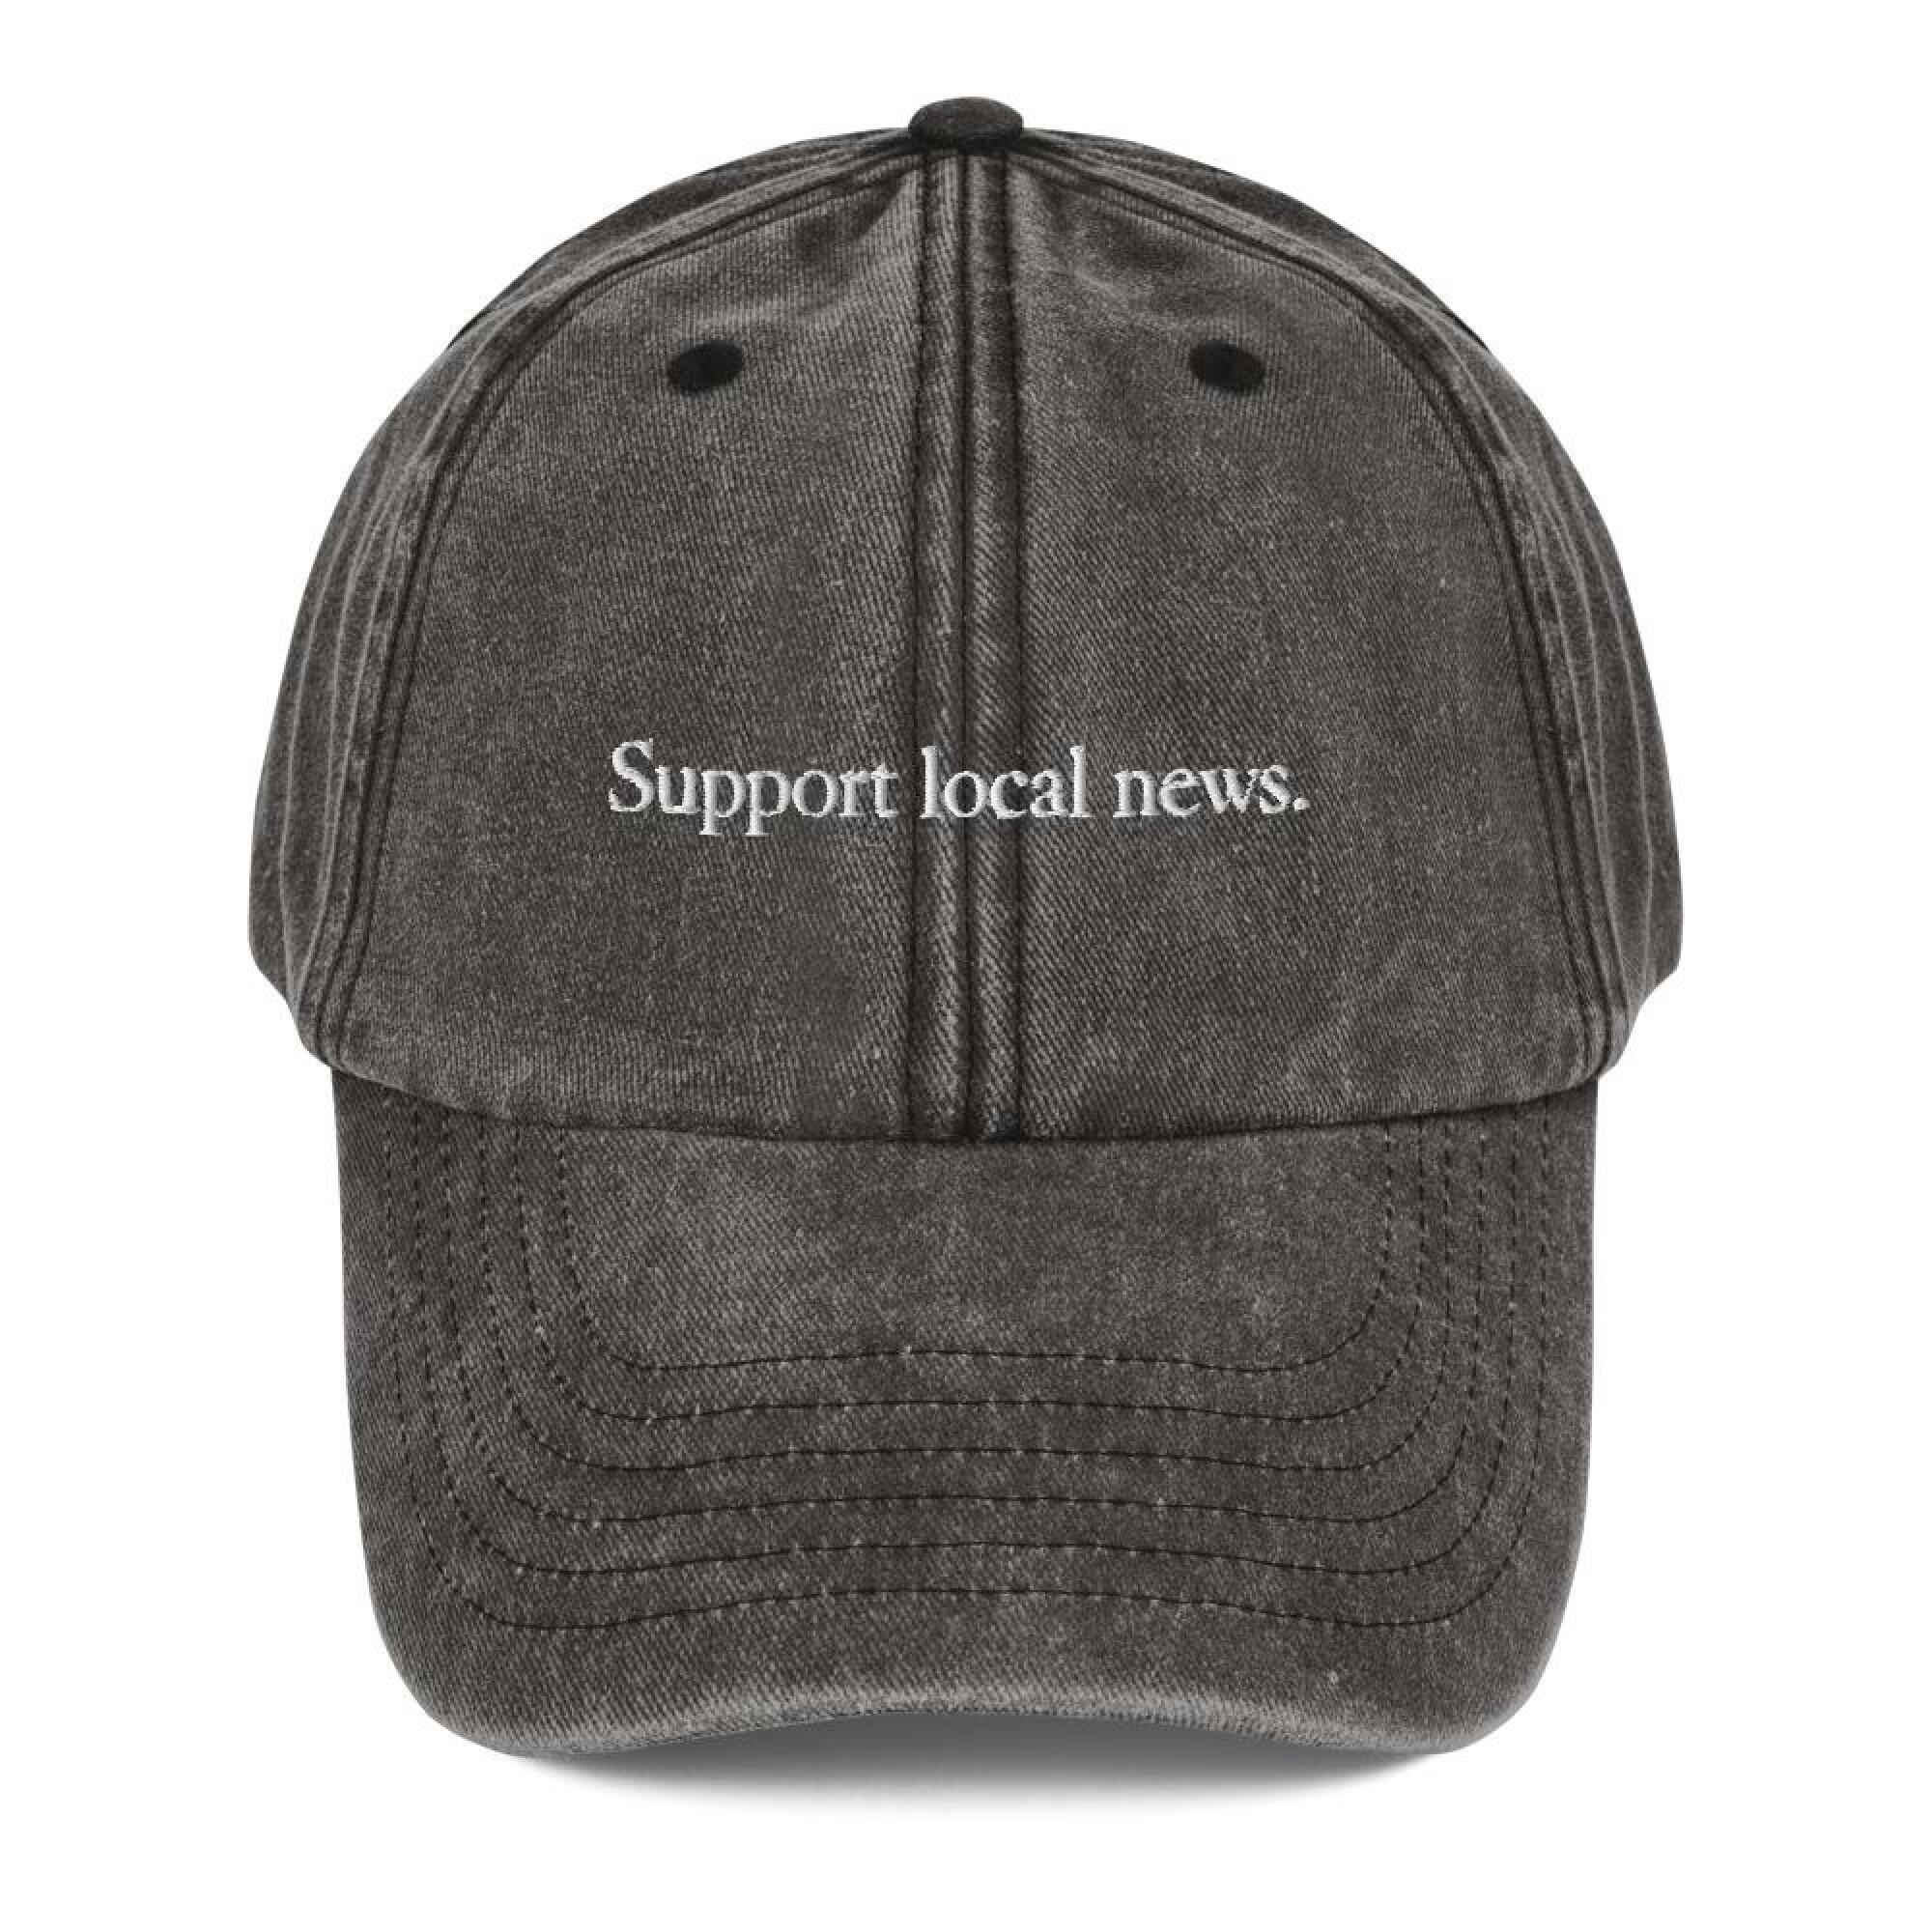 LAT Support Local News hat